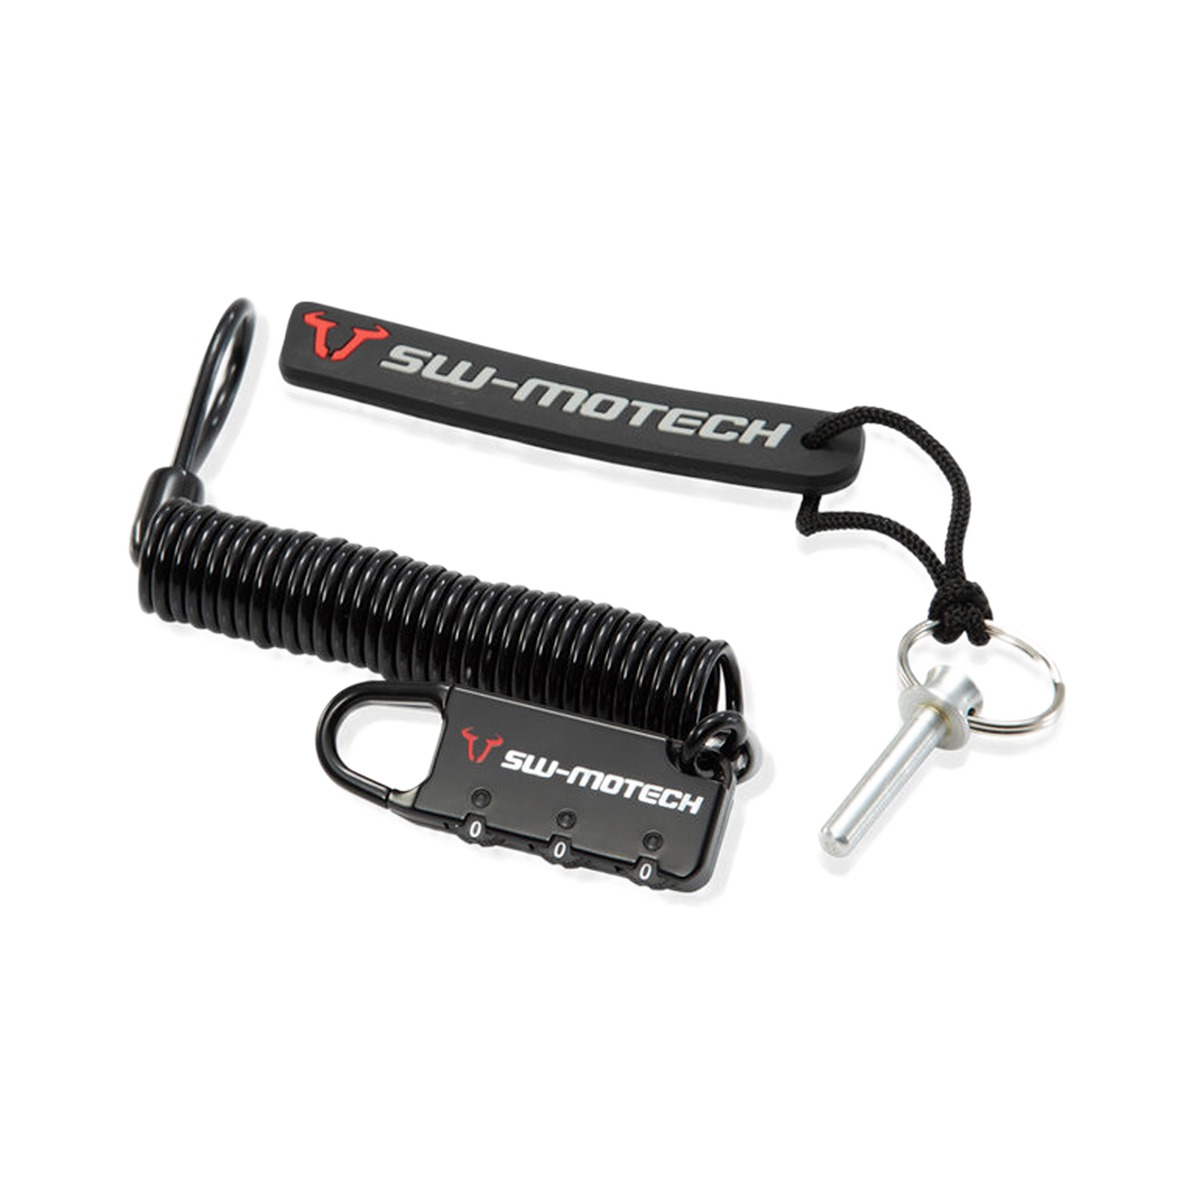 SW-Motech Locking Pin Quick-Lock EVO Bags/Cable Lock Size